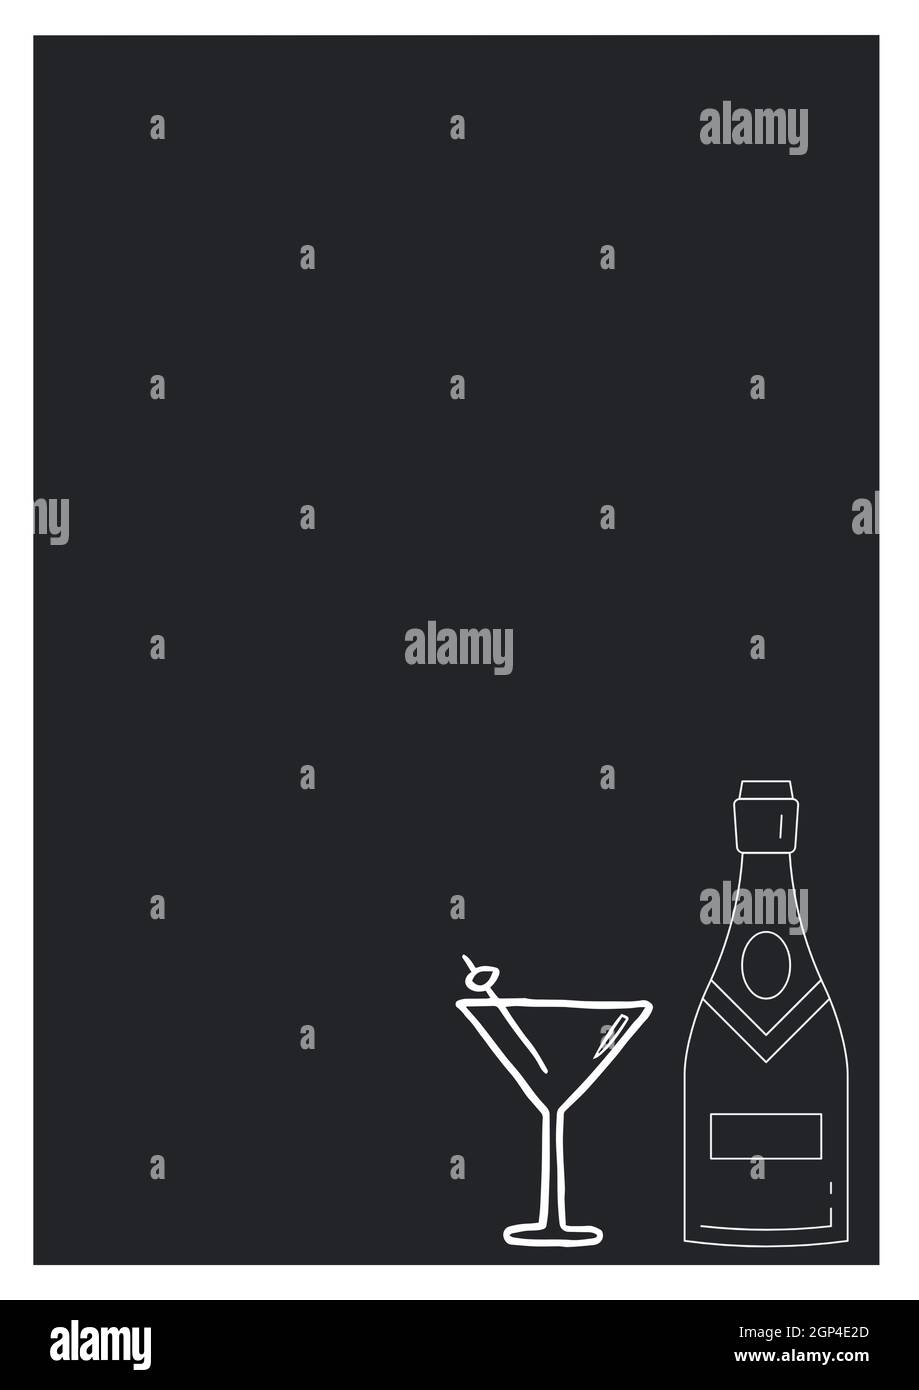 Composition of drink and bottle icons on black background Stock Photo